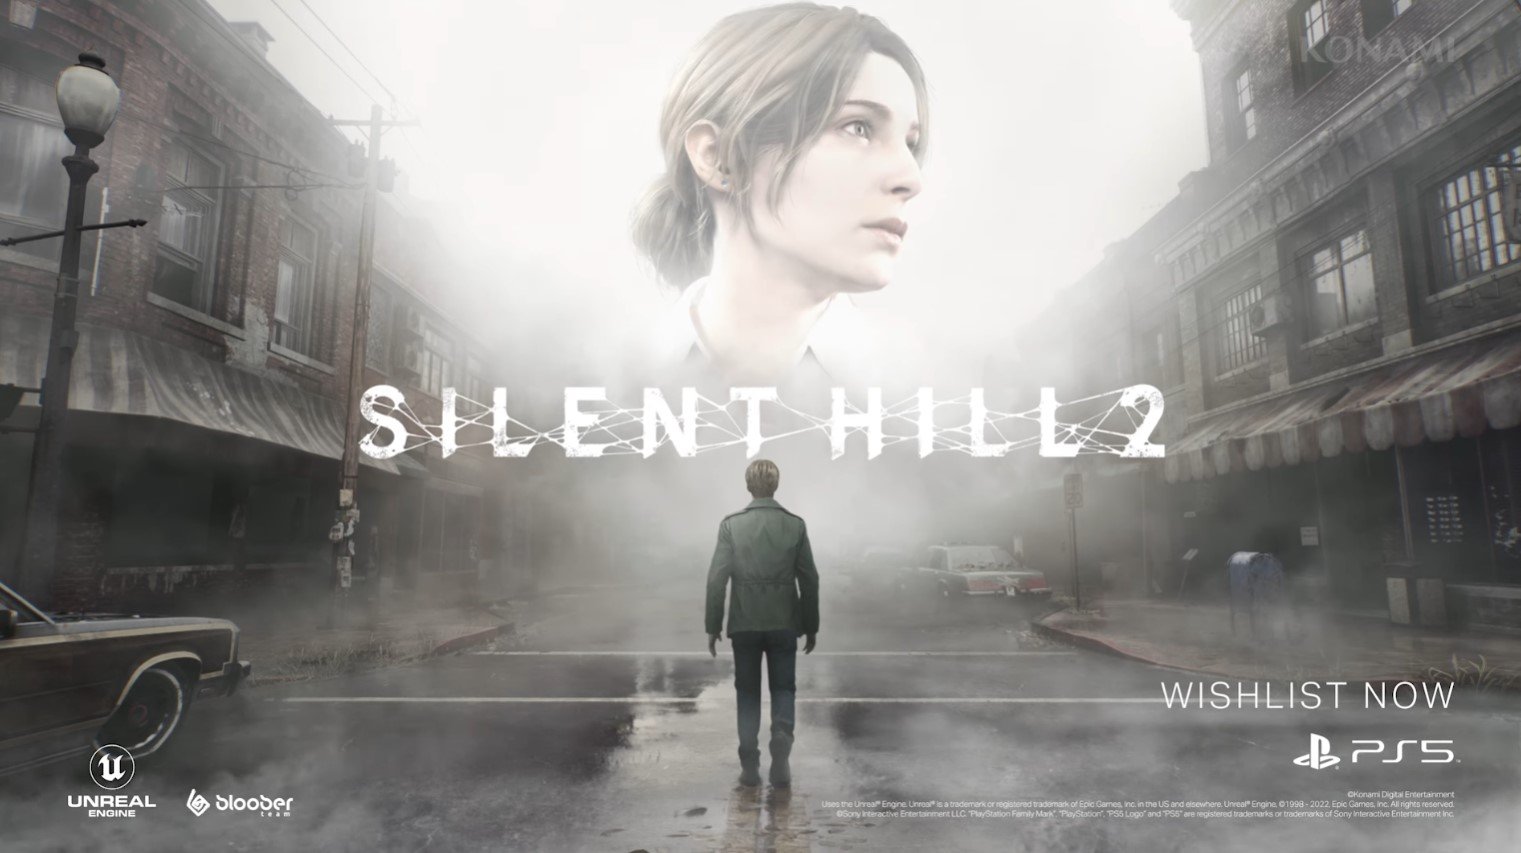 Silent Hill 2' remake revealed for PC, PS5, and timed console